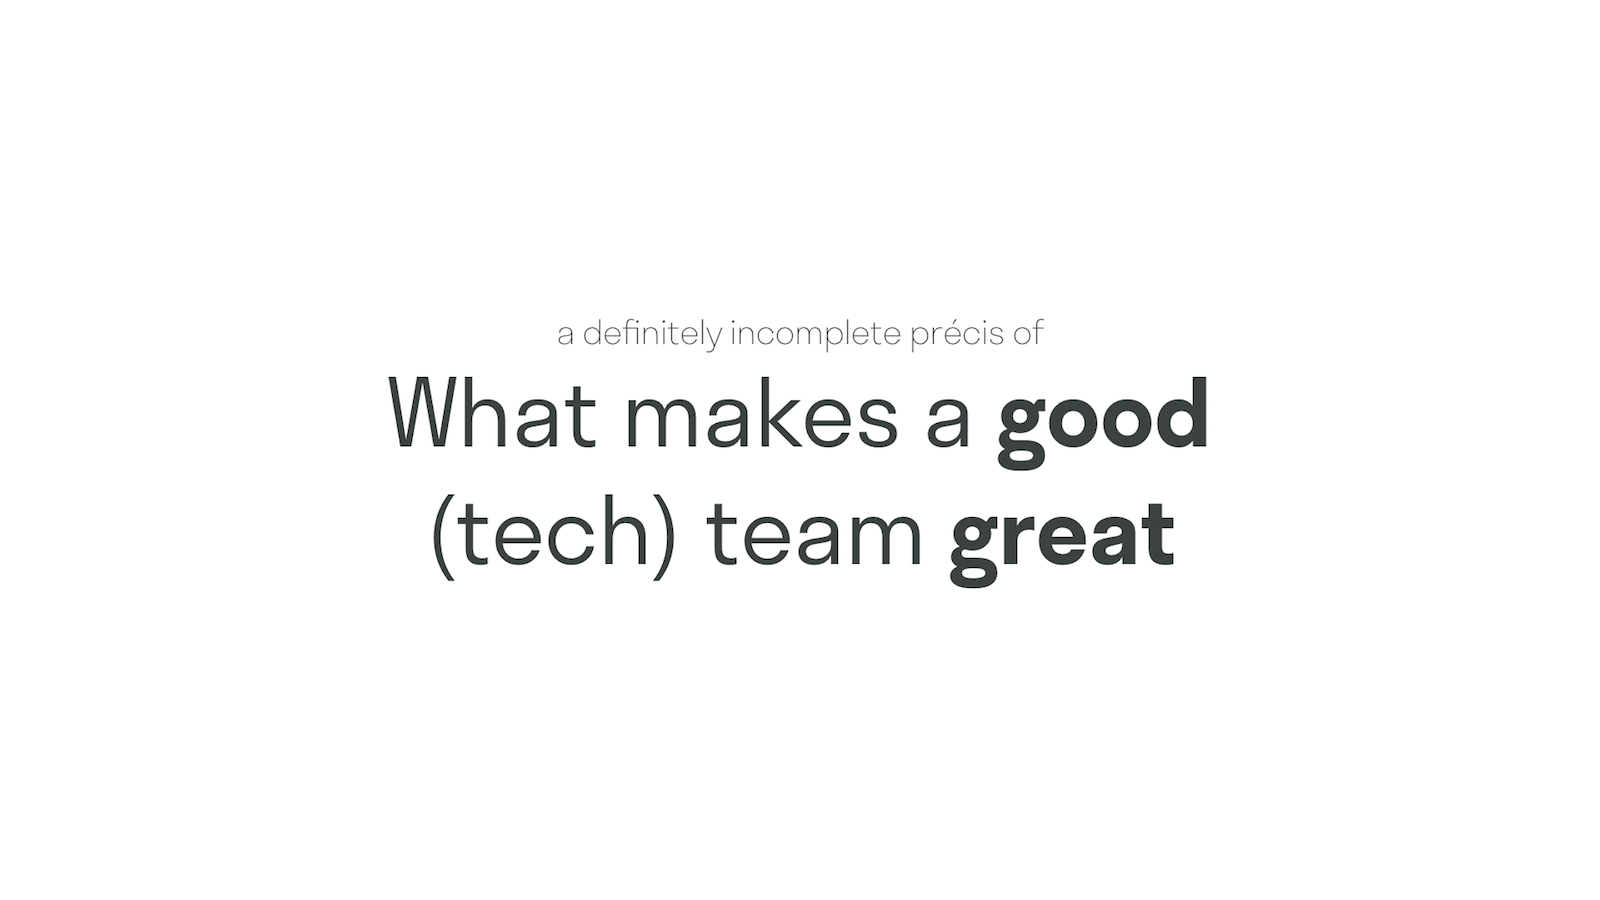 A definitely incomplete précis of… What makes a good (tech) team great.